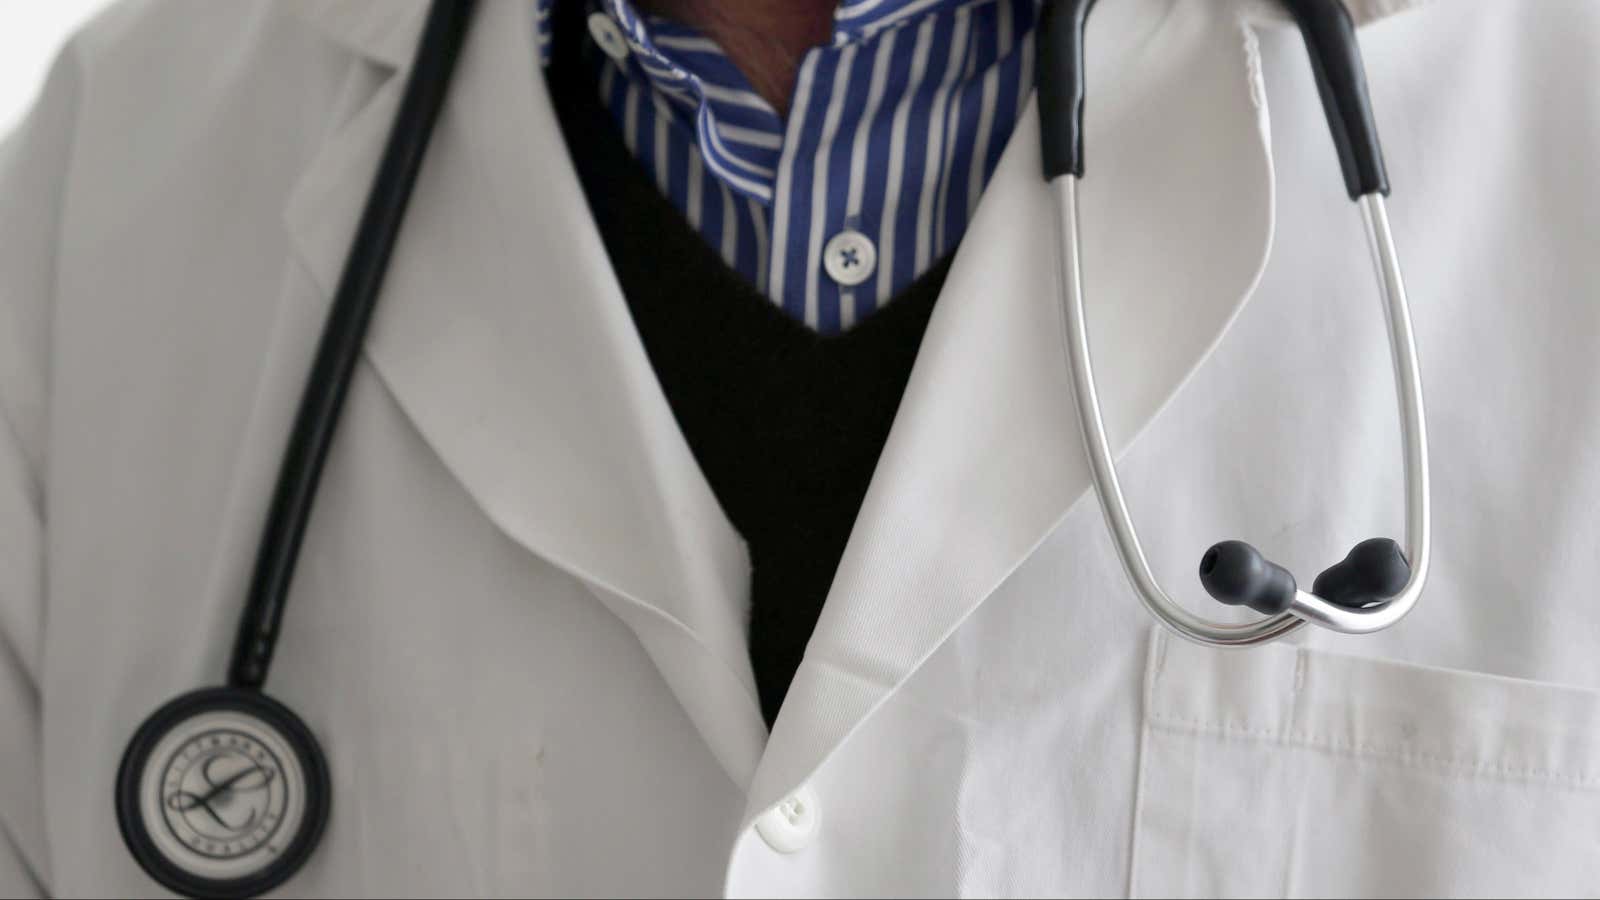 Medical schools are selecting for the wrong type of doctor.